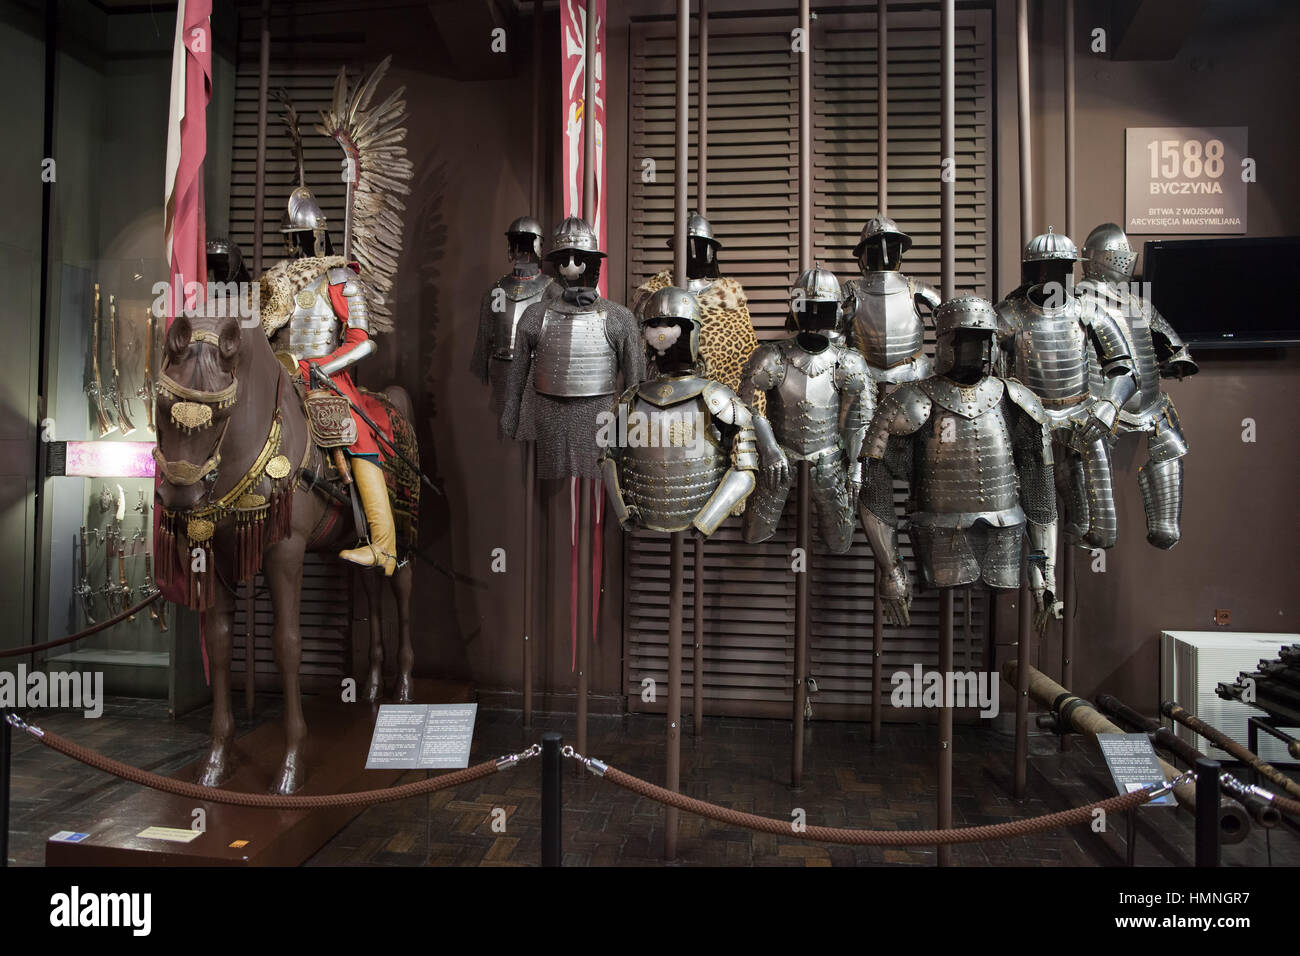 Polish Hussars (Husarz, Husaria) armours in Polish Army Museum in Warsaw, Poland, Europe, 16-17 century Stock Photo